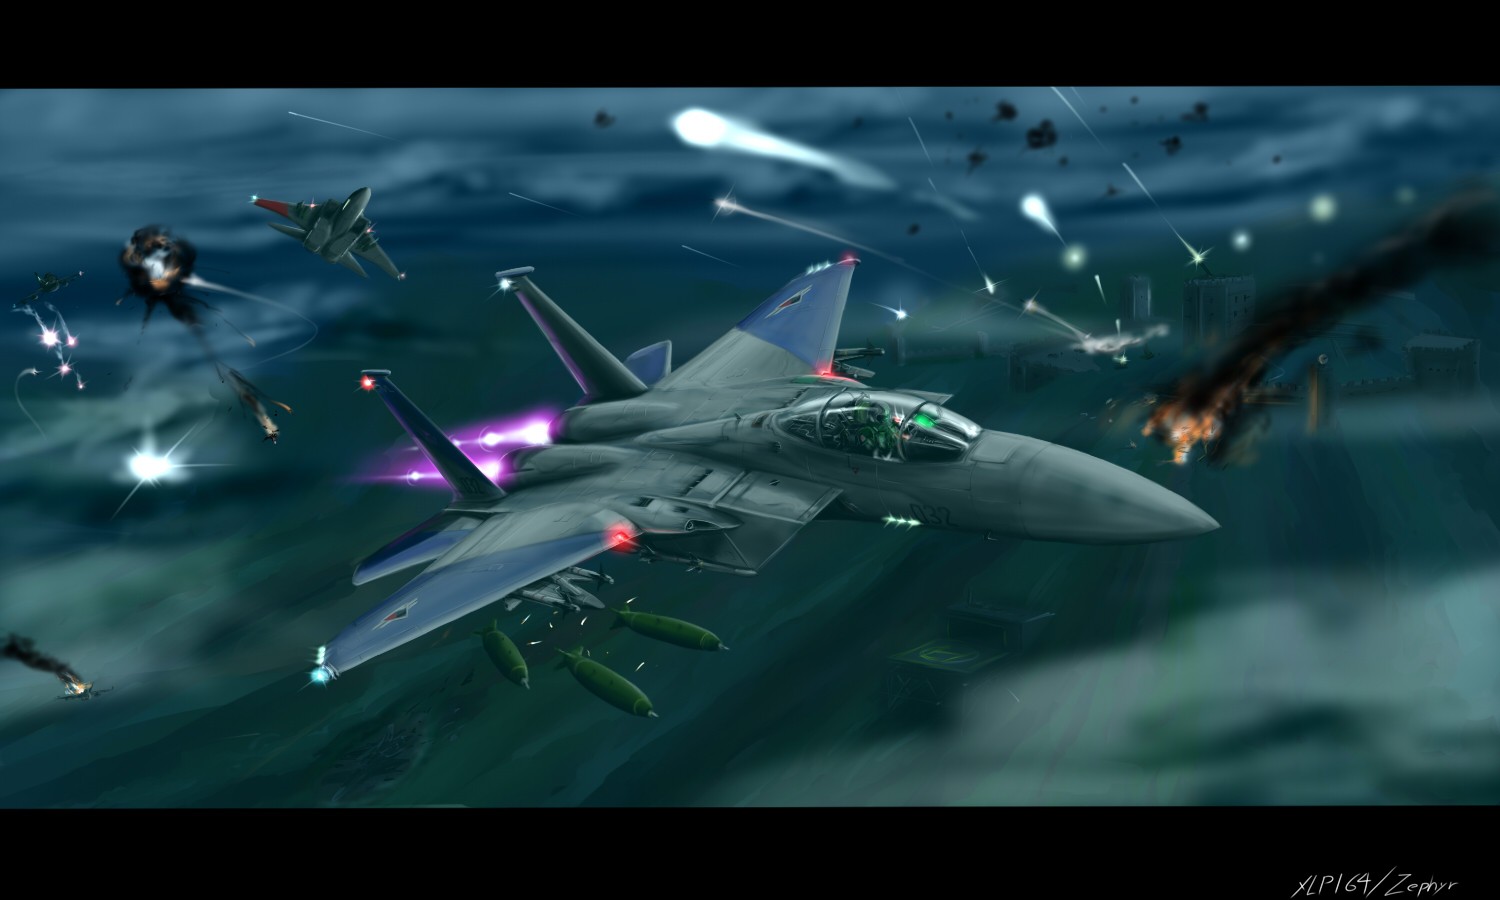 ace, Combat, Game, Jet, Airplane, Aircraft, Fighter, Plane, Military, Battle, Rt Wallpaper